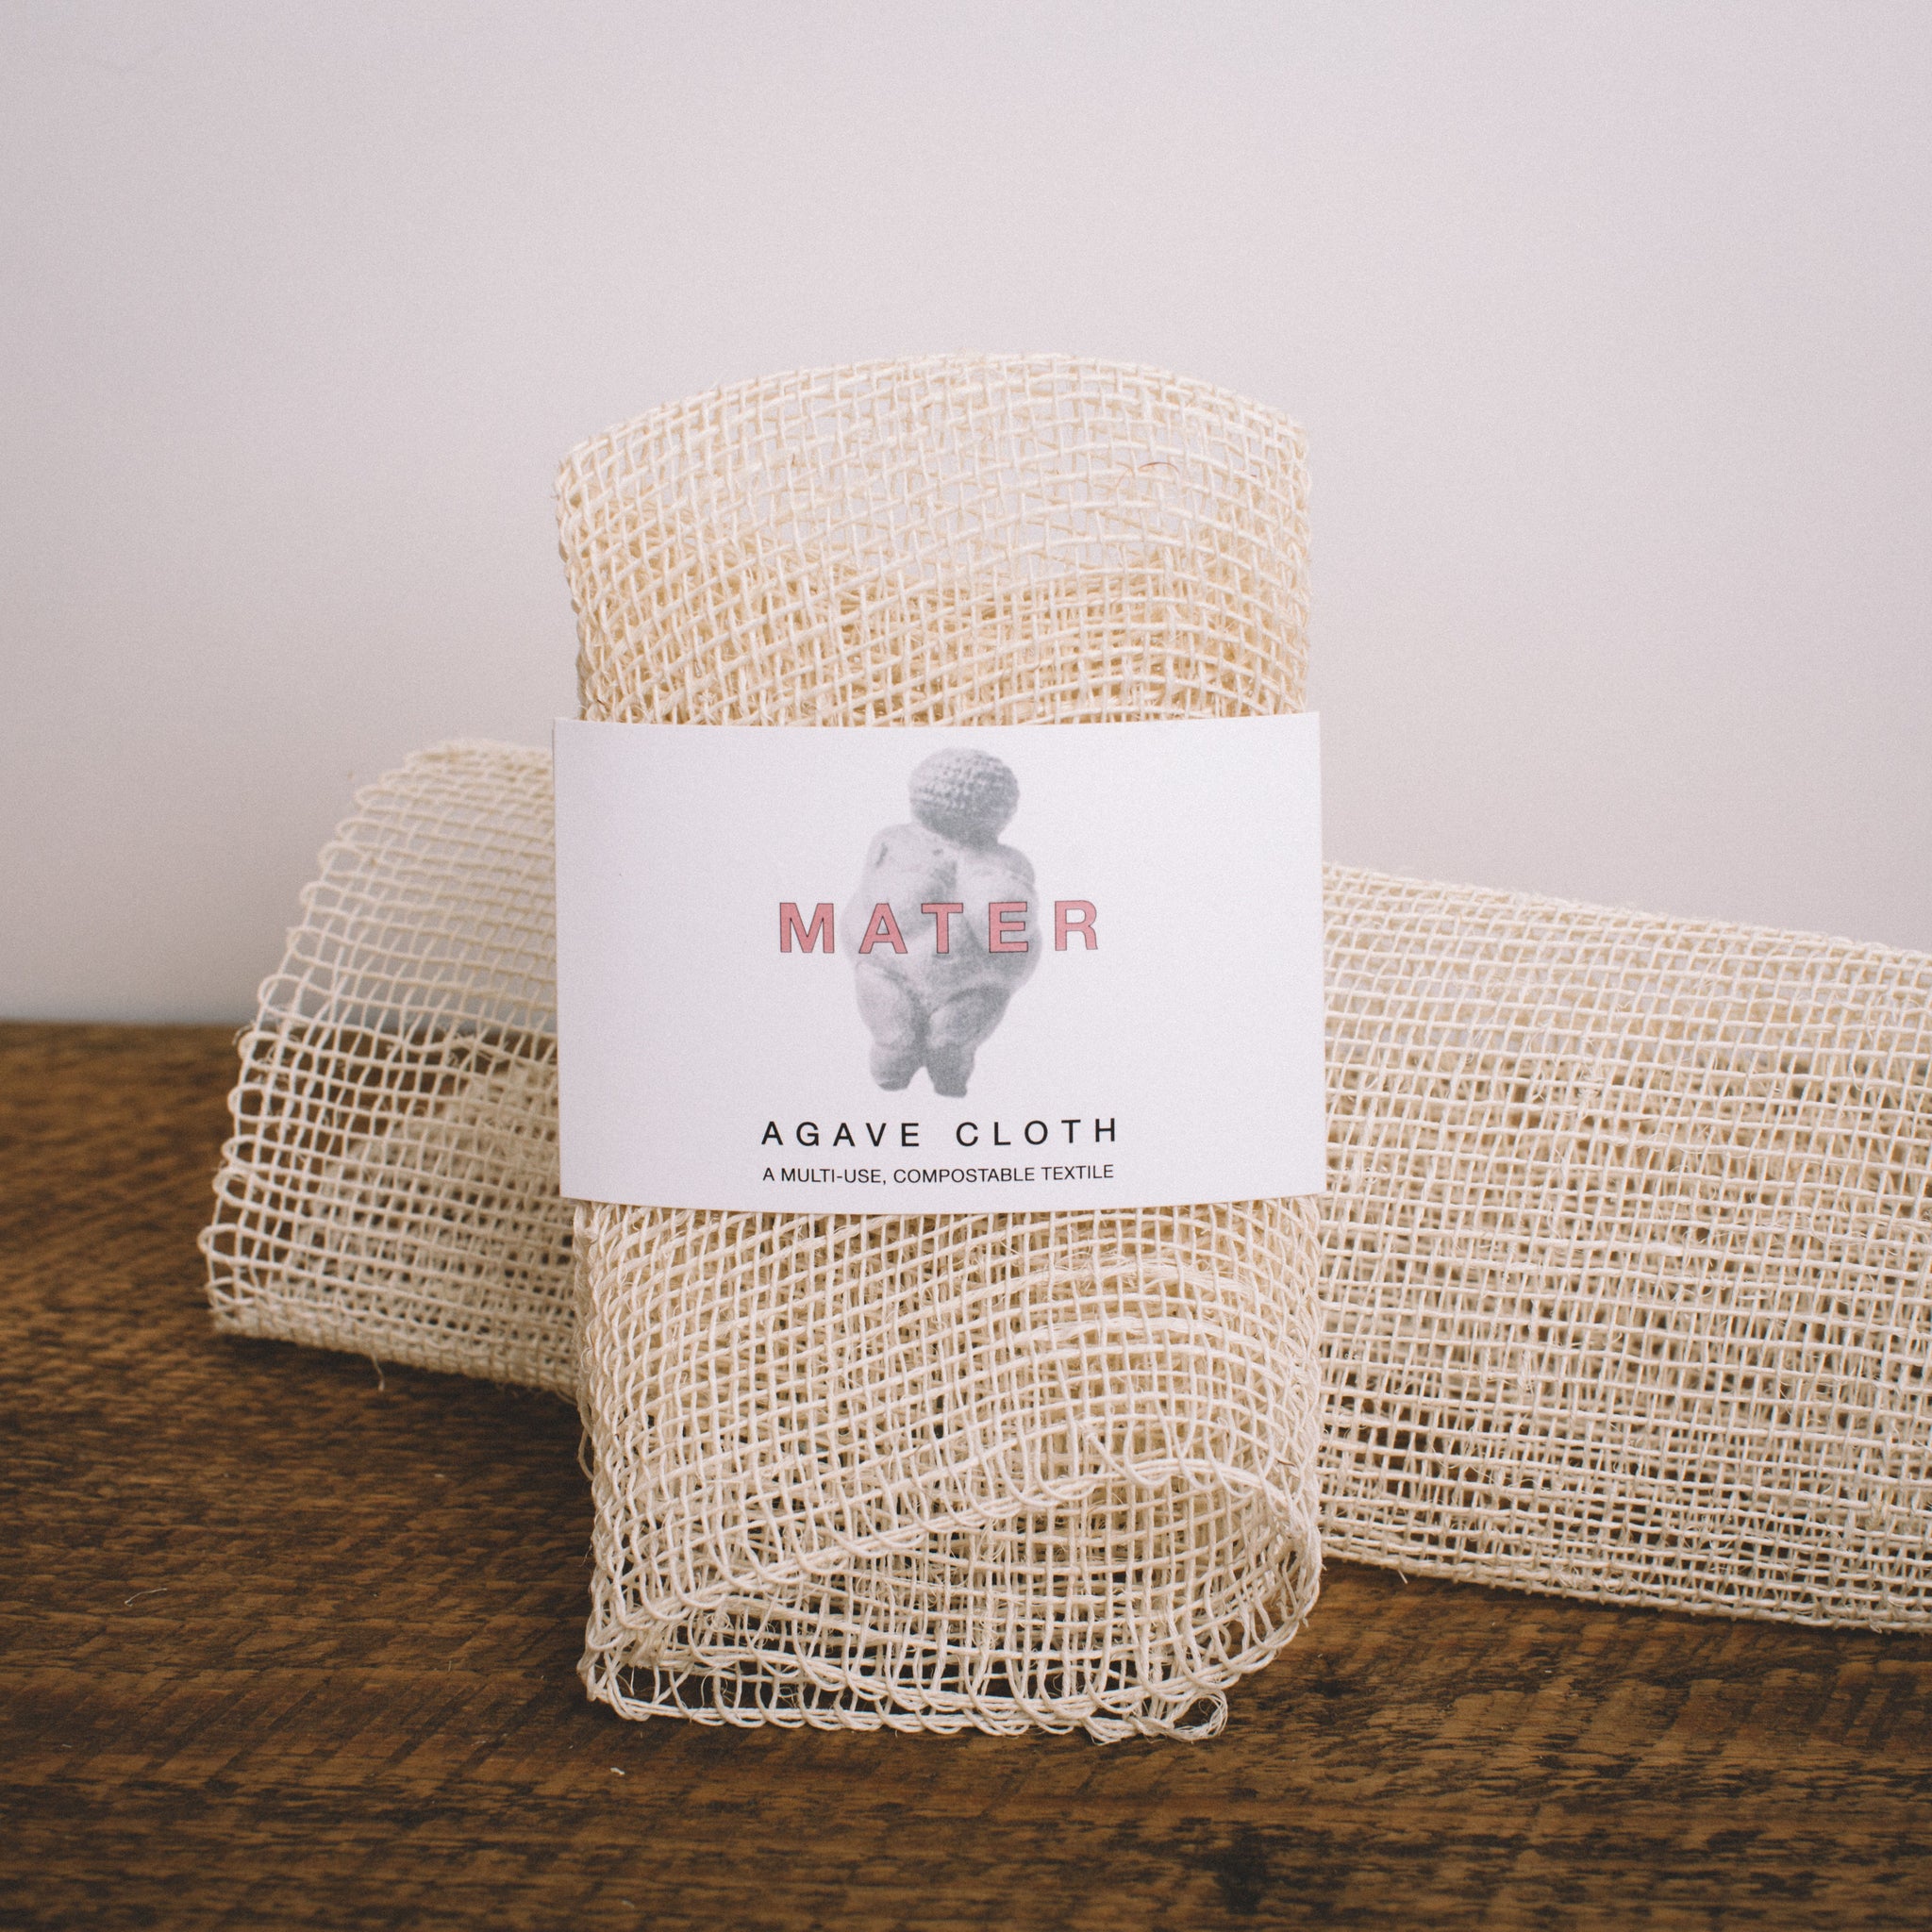 AGAVE CLOTH || MATER